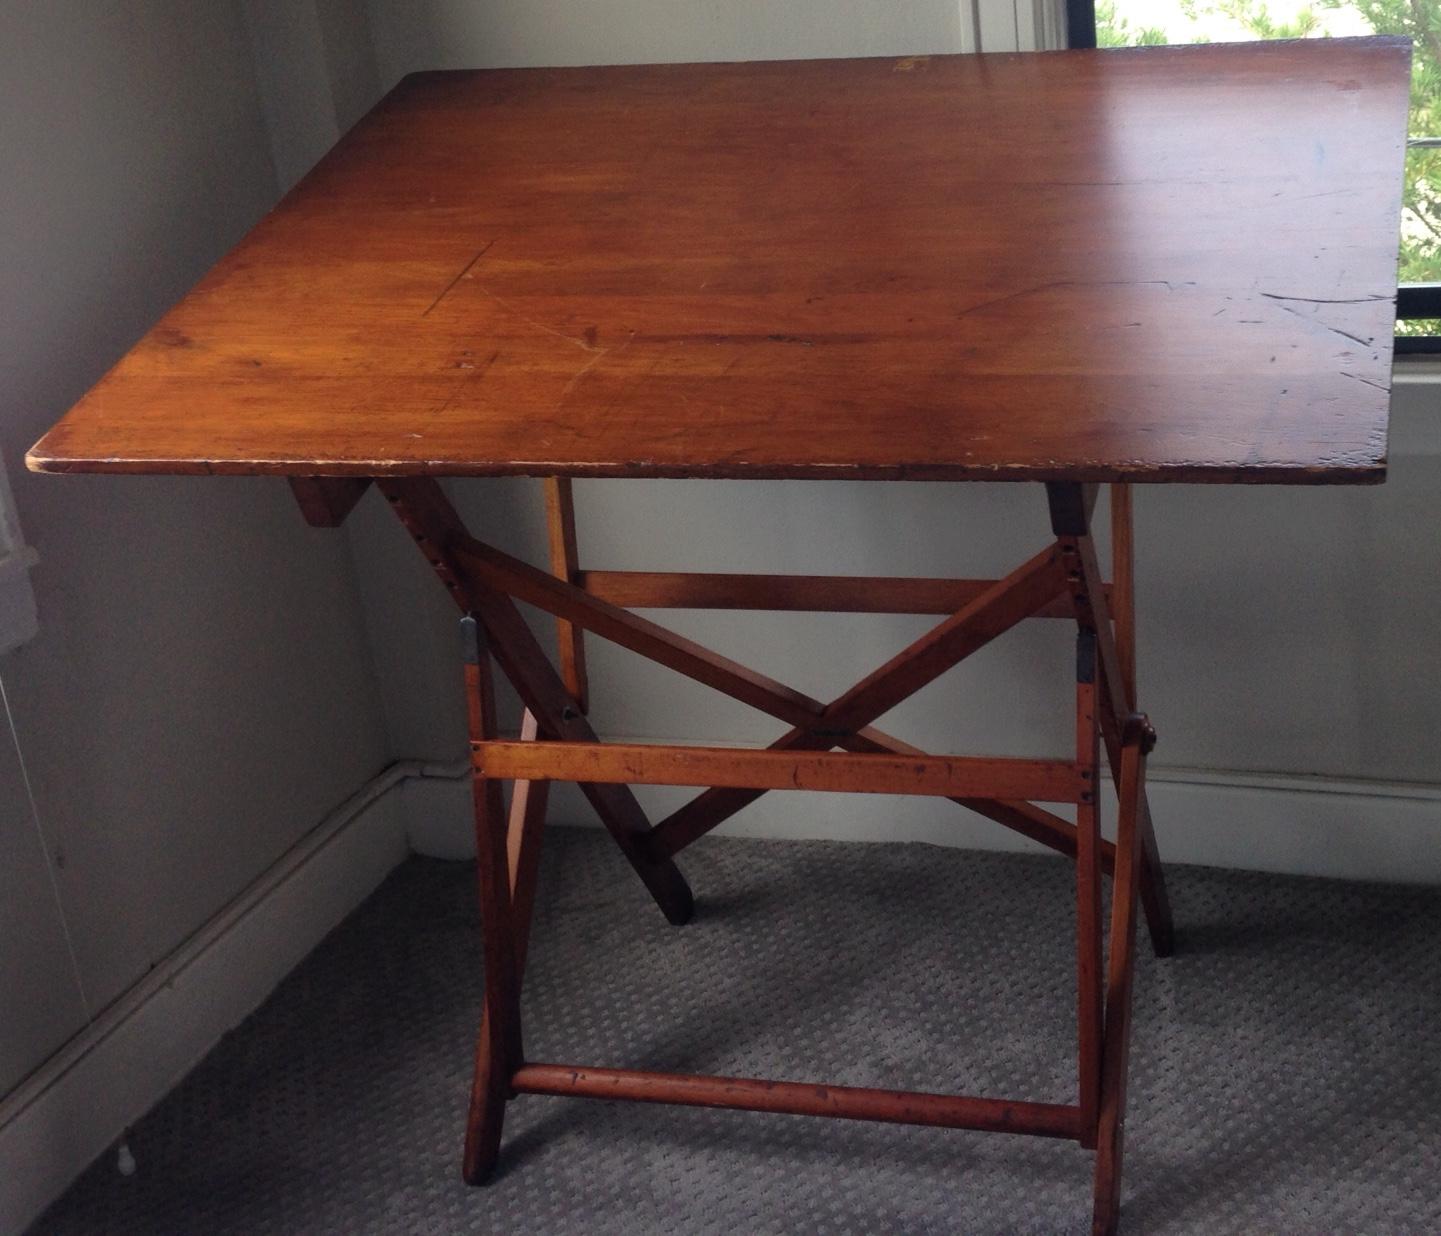 Drafting table by Keuffel Esser, circa 1900s. Made from Southern Plantation Pine, the oversized top has acquired a beautiful patina over years of work in an architect's office. Adjusts from a flat surface to a 135 degree angle. The adjustment is by